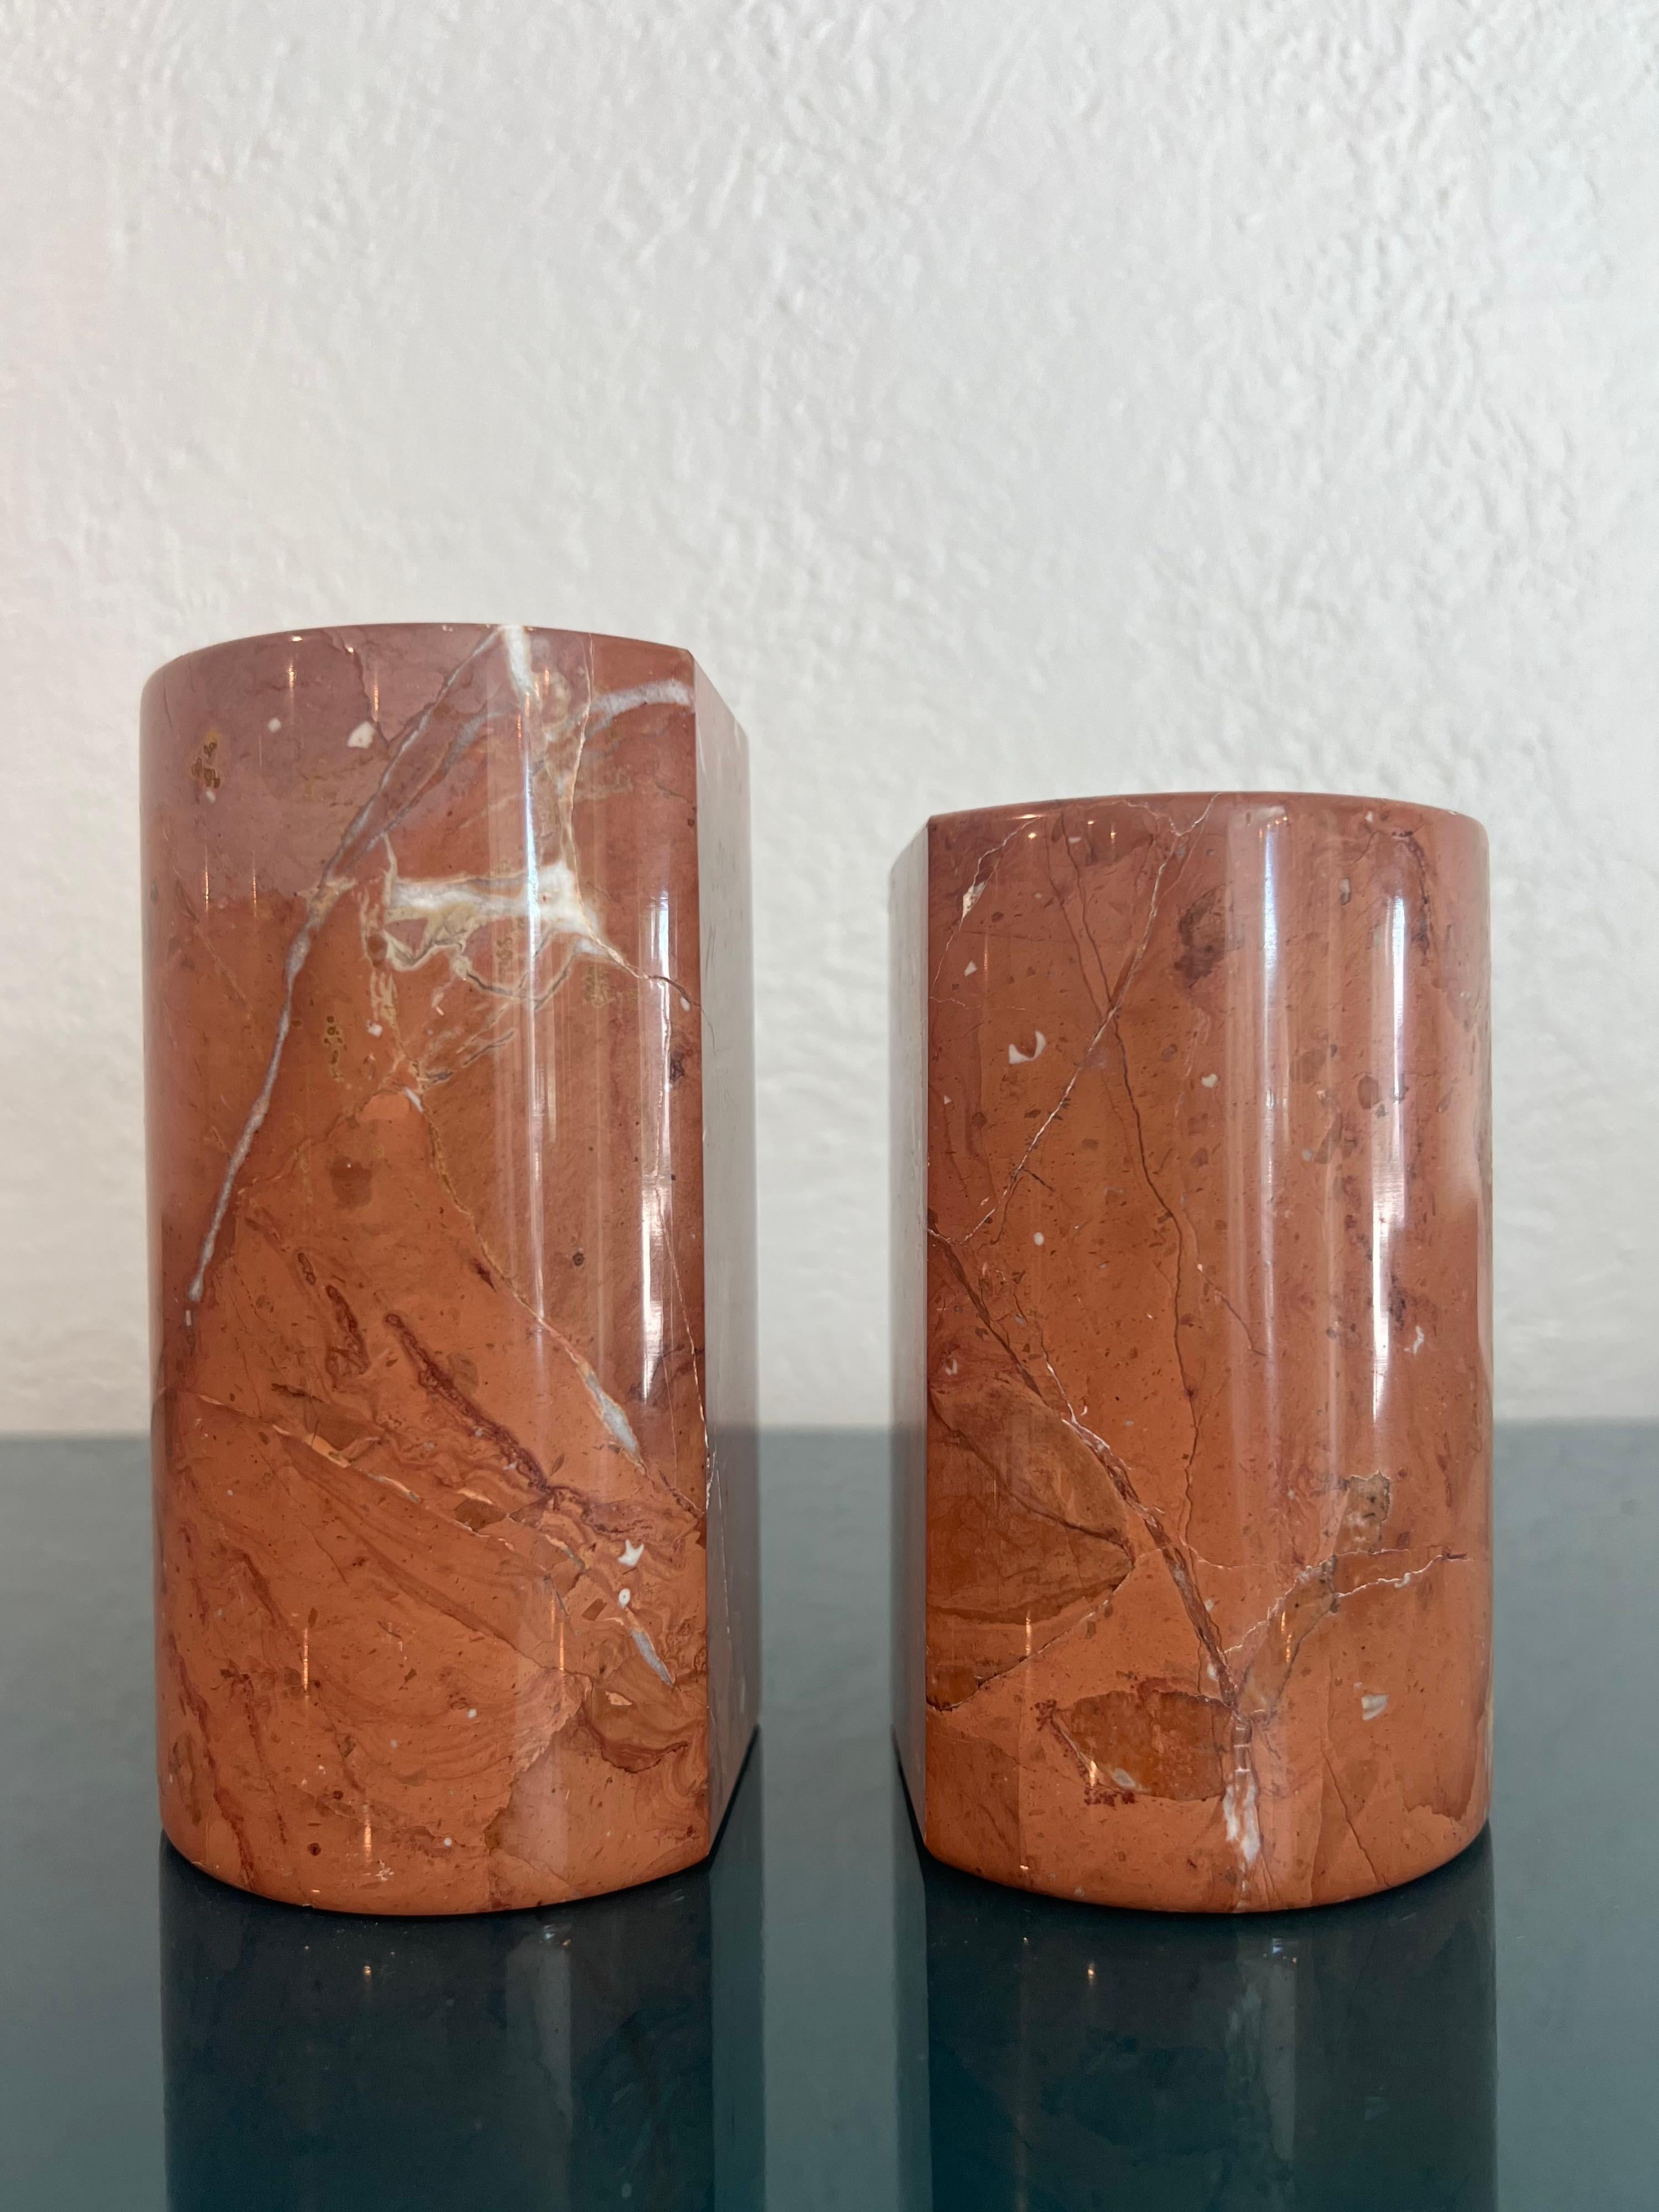 Oggetti Italian marble bookends. Brilliant veining throughout. Signed. Small chip on bottom of one (please refer to photos). Please note they are slightly different in height. One stands 5.5” high and the other stands 4 3/4” high.

Would work well